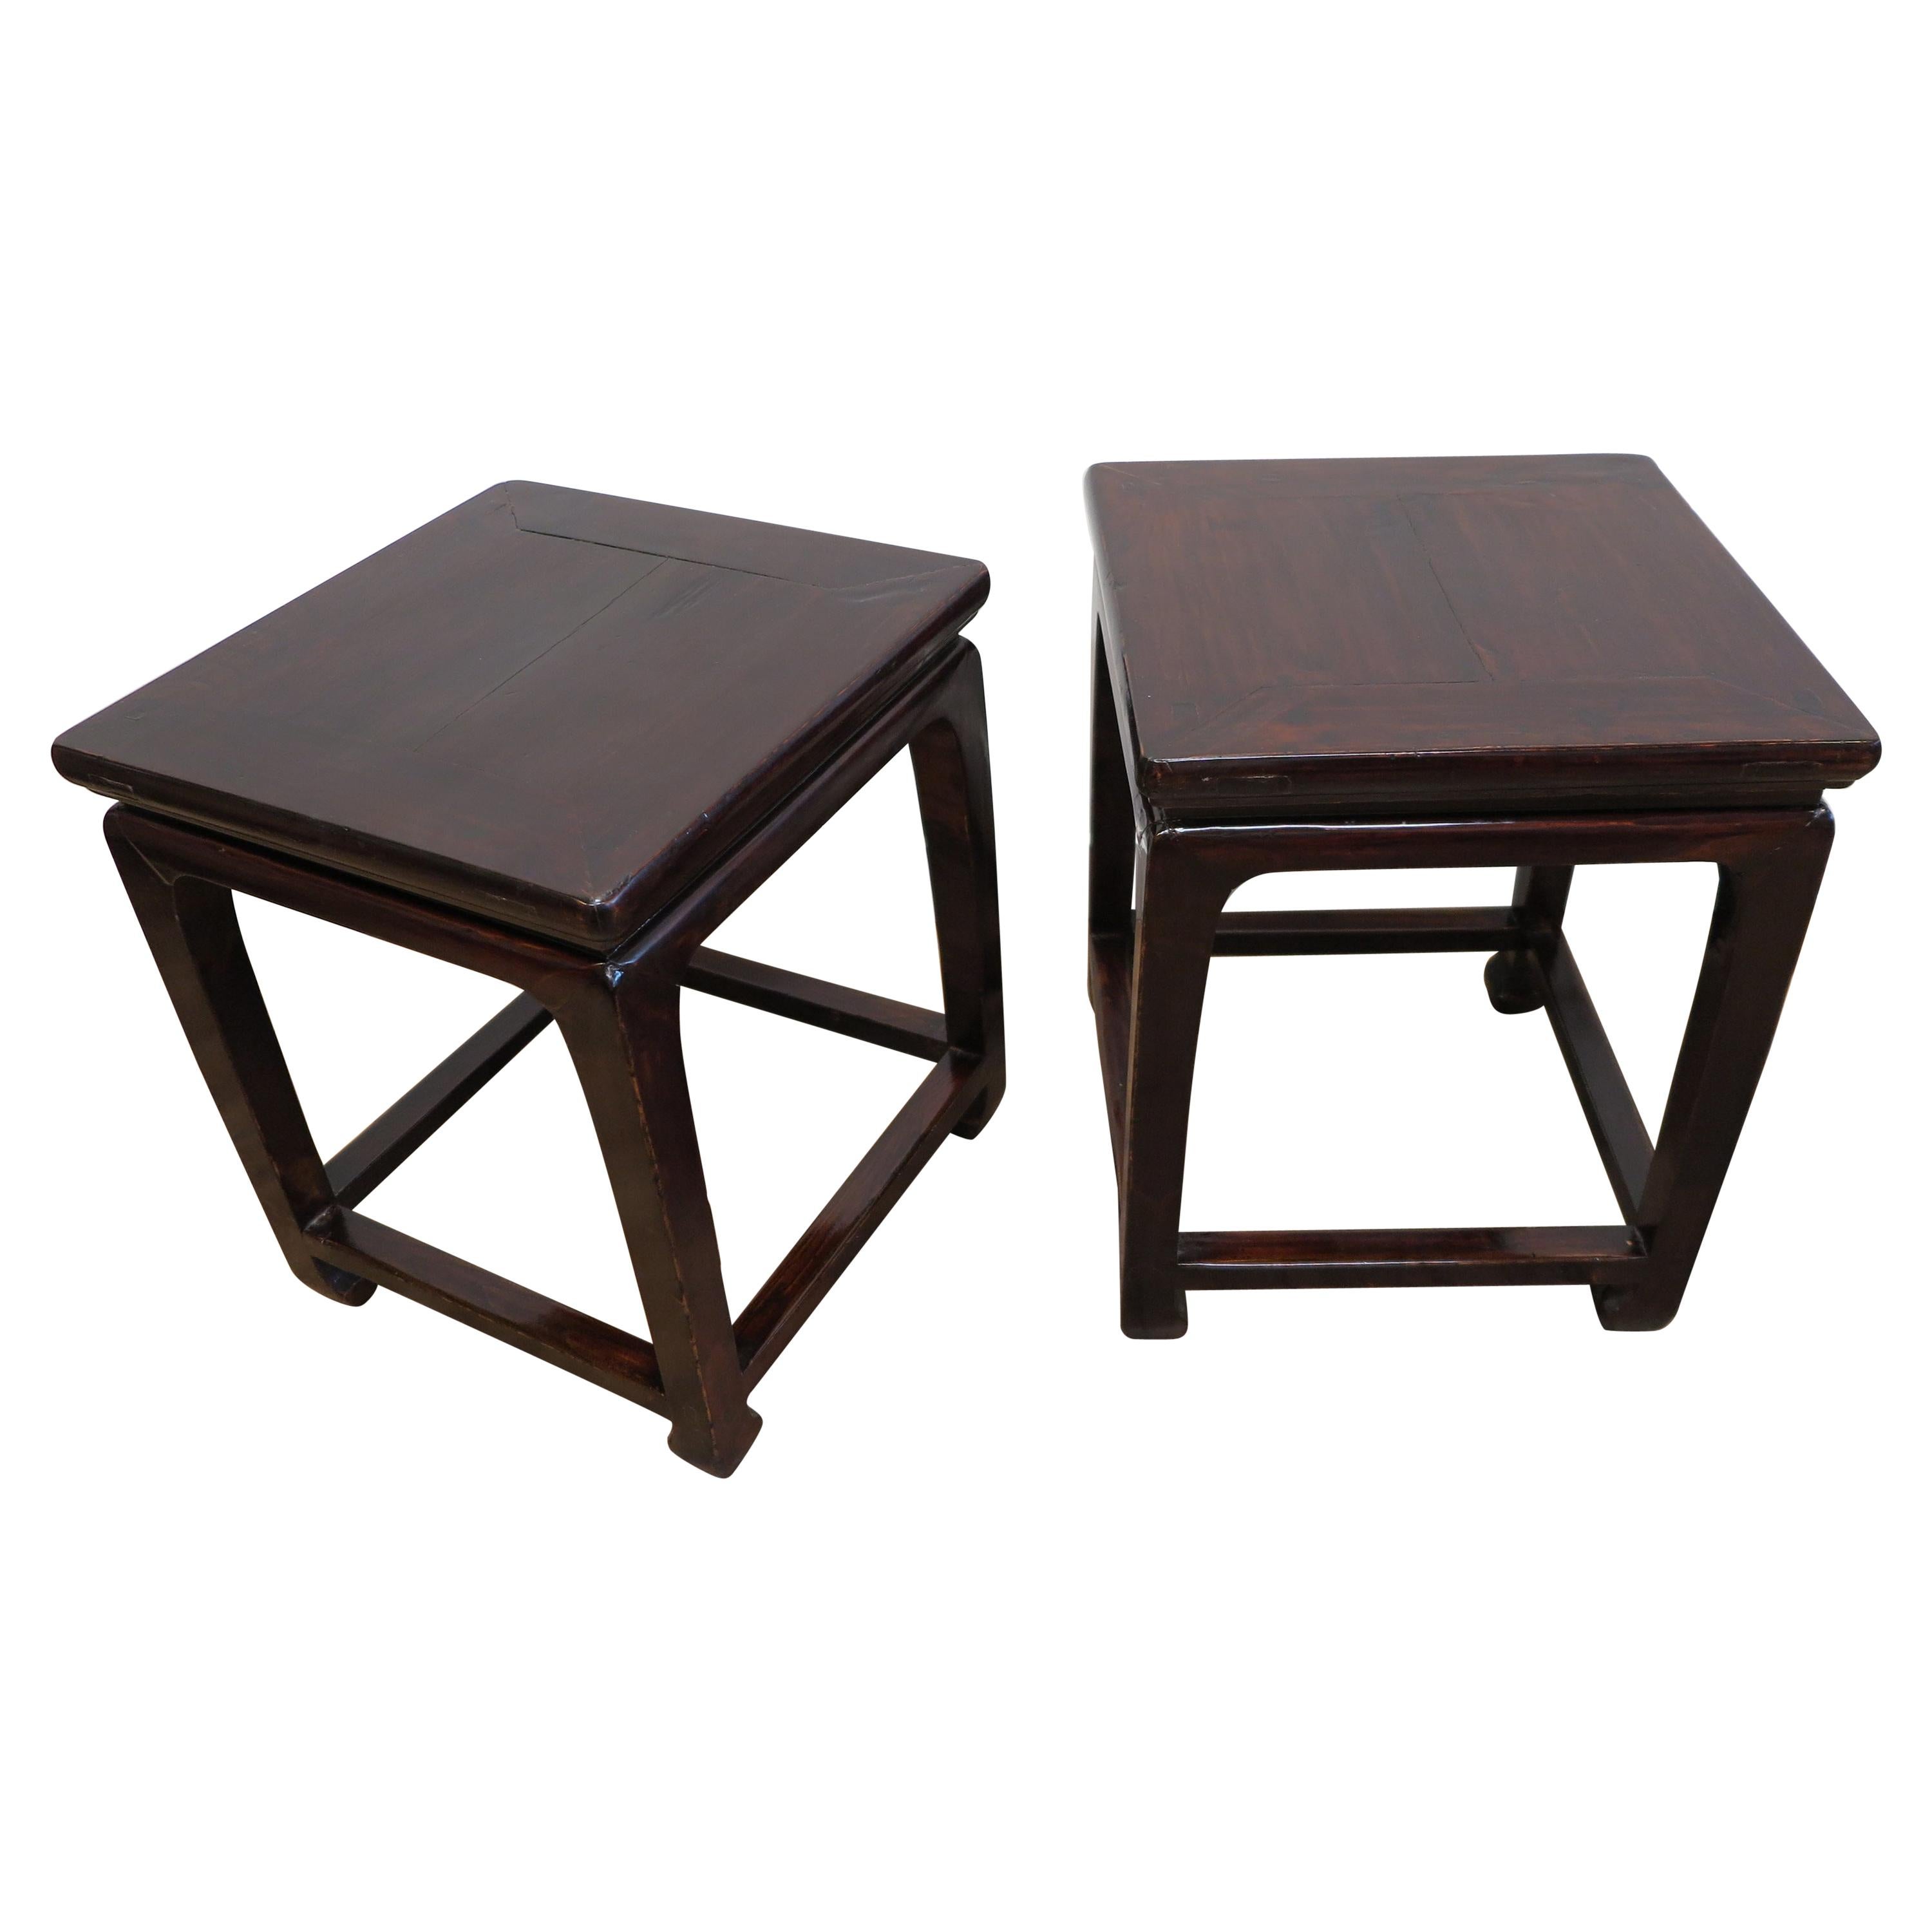 Chinese Antique Side Tables Pair